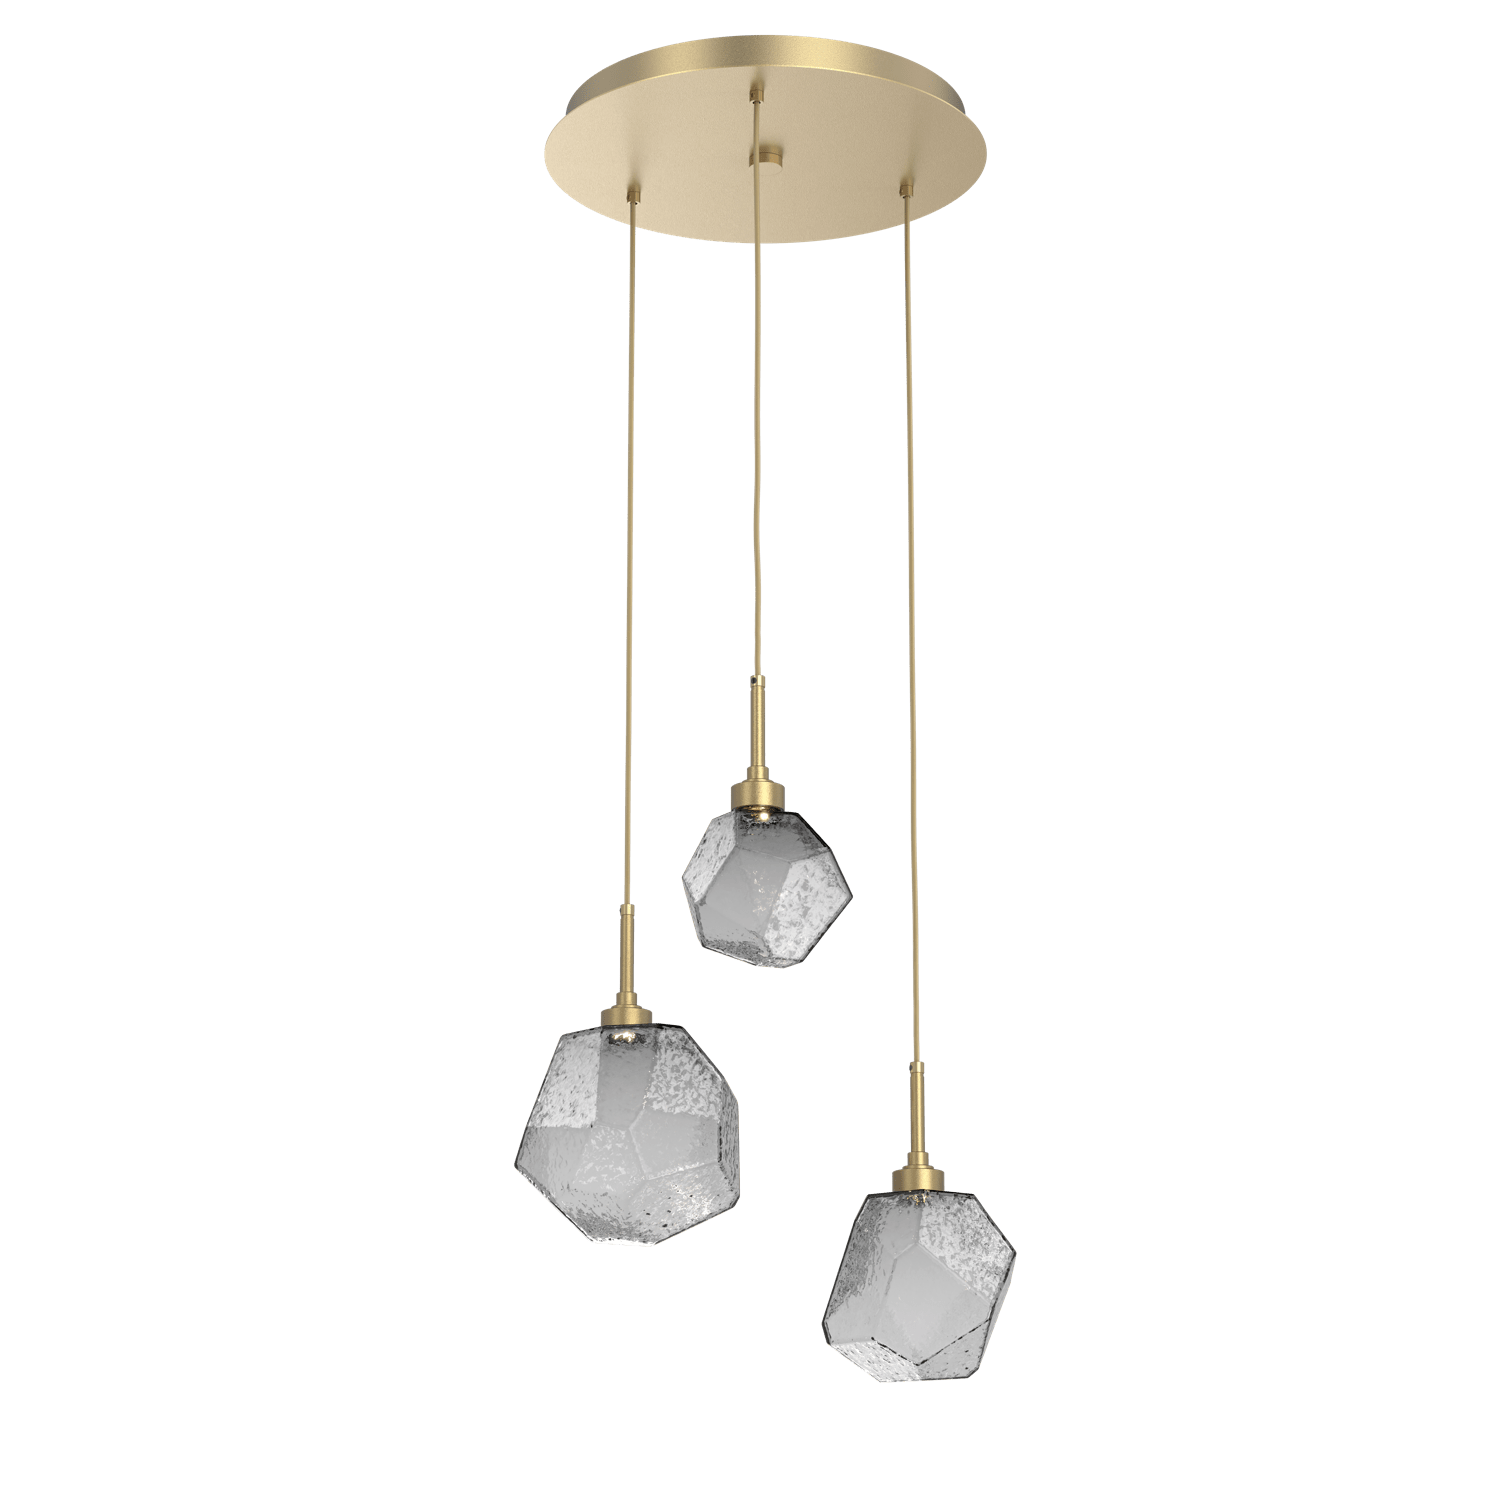 CHB0039-03-GB-S-Hammerton-Studio-Gem-3-light-round-pendant-chandelier-with-gilded-brass-finish-and-smoke-blown-glass-shades-and-LED-lamping